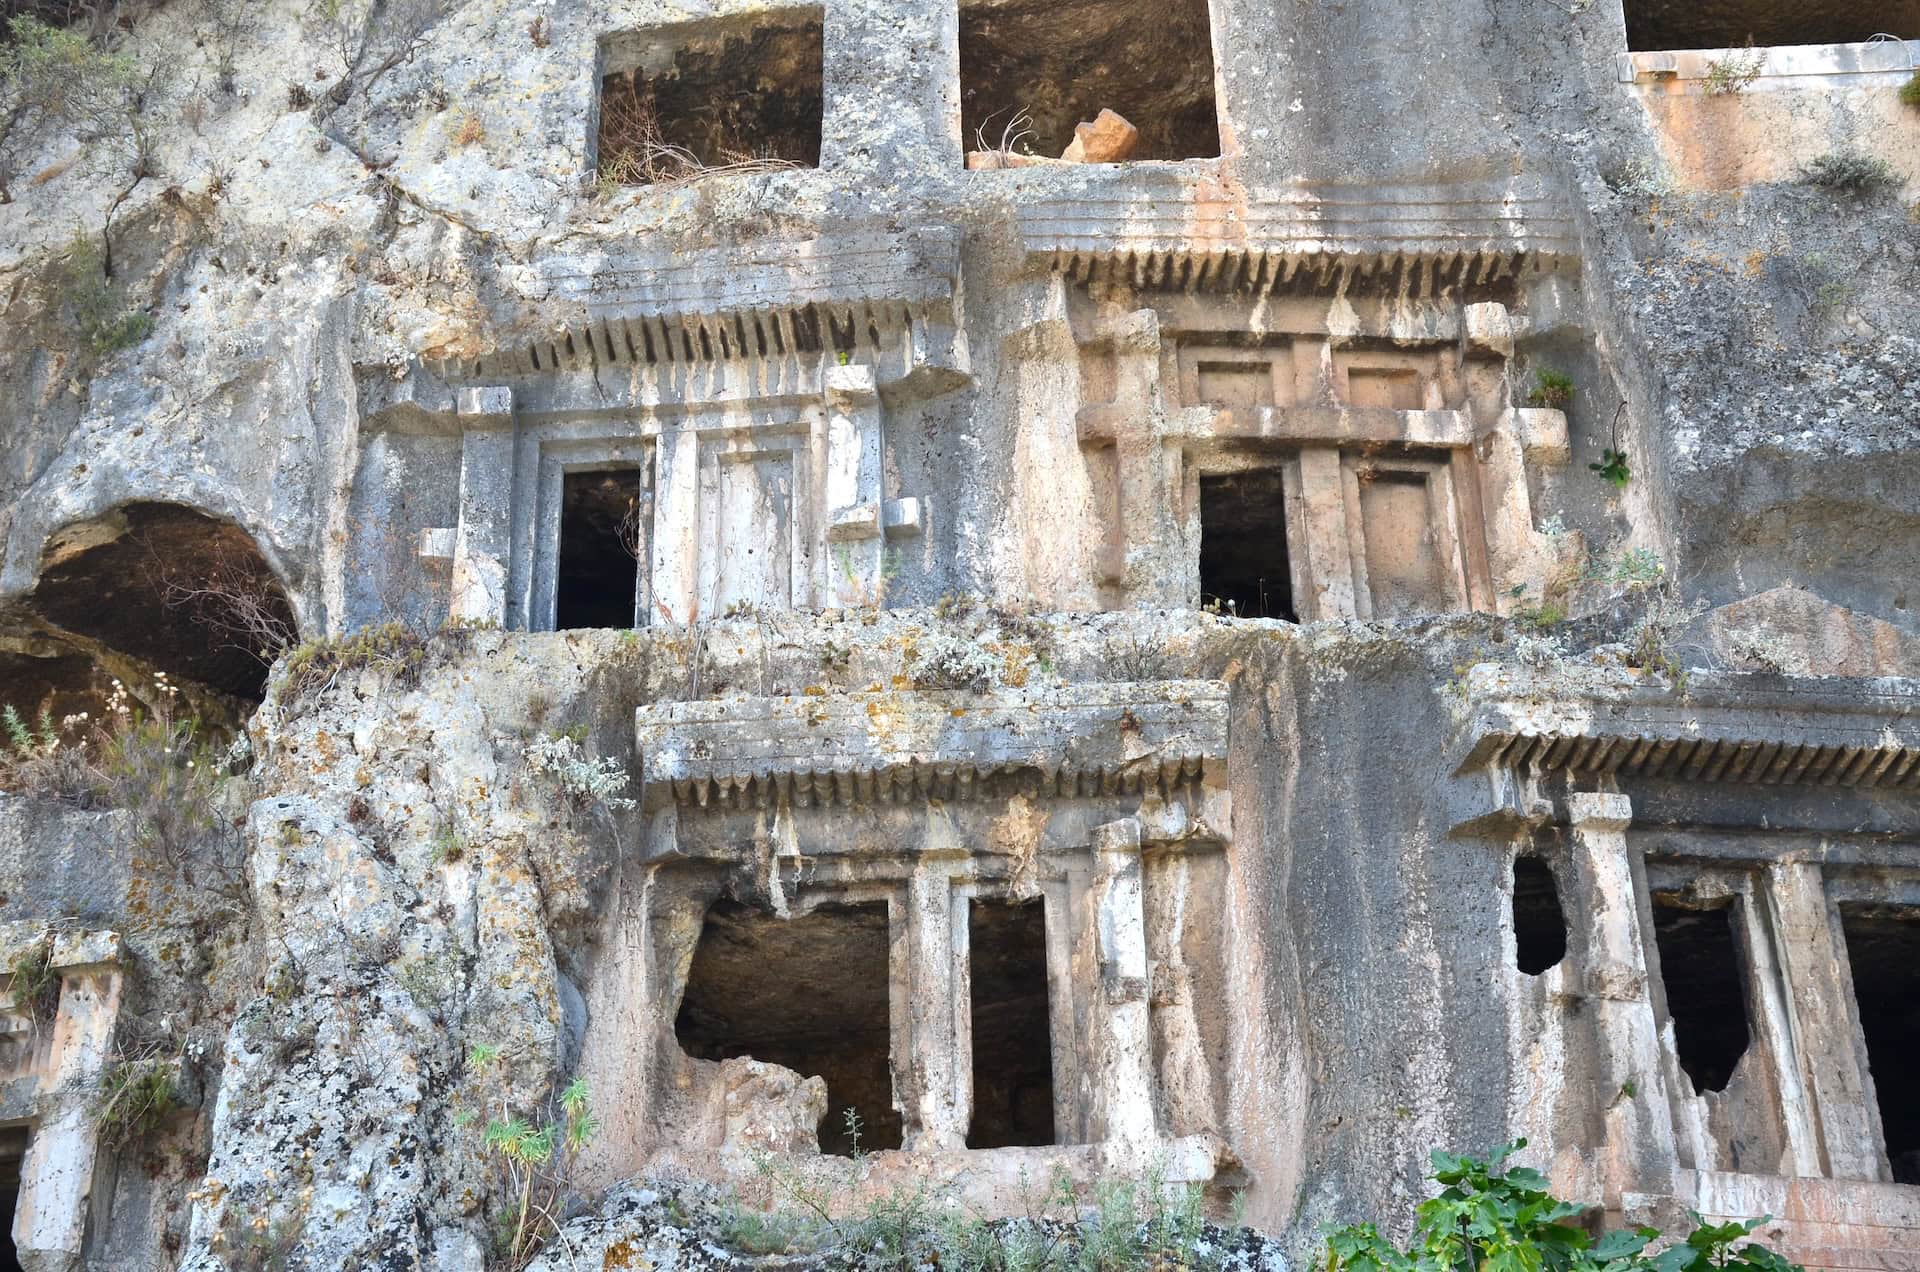 Rock-cut tombs at the Amyntas Rock Tombs in Fethiye, Turkey